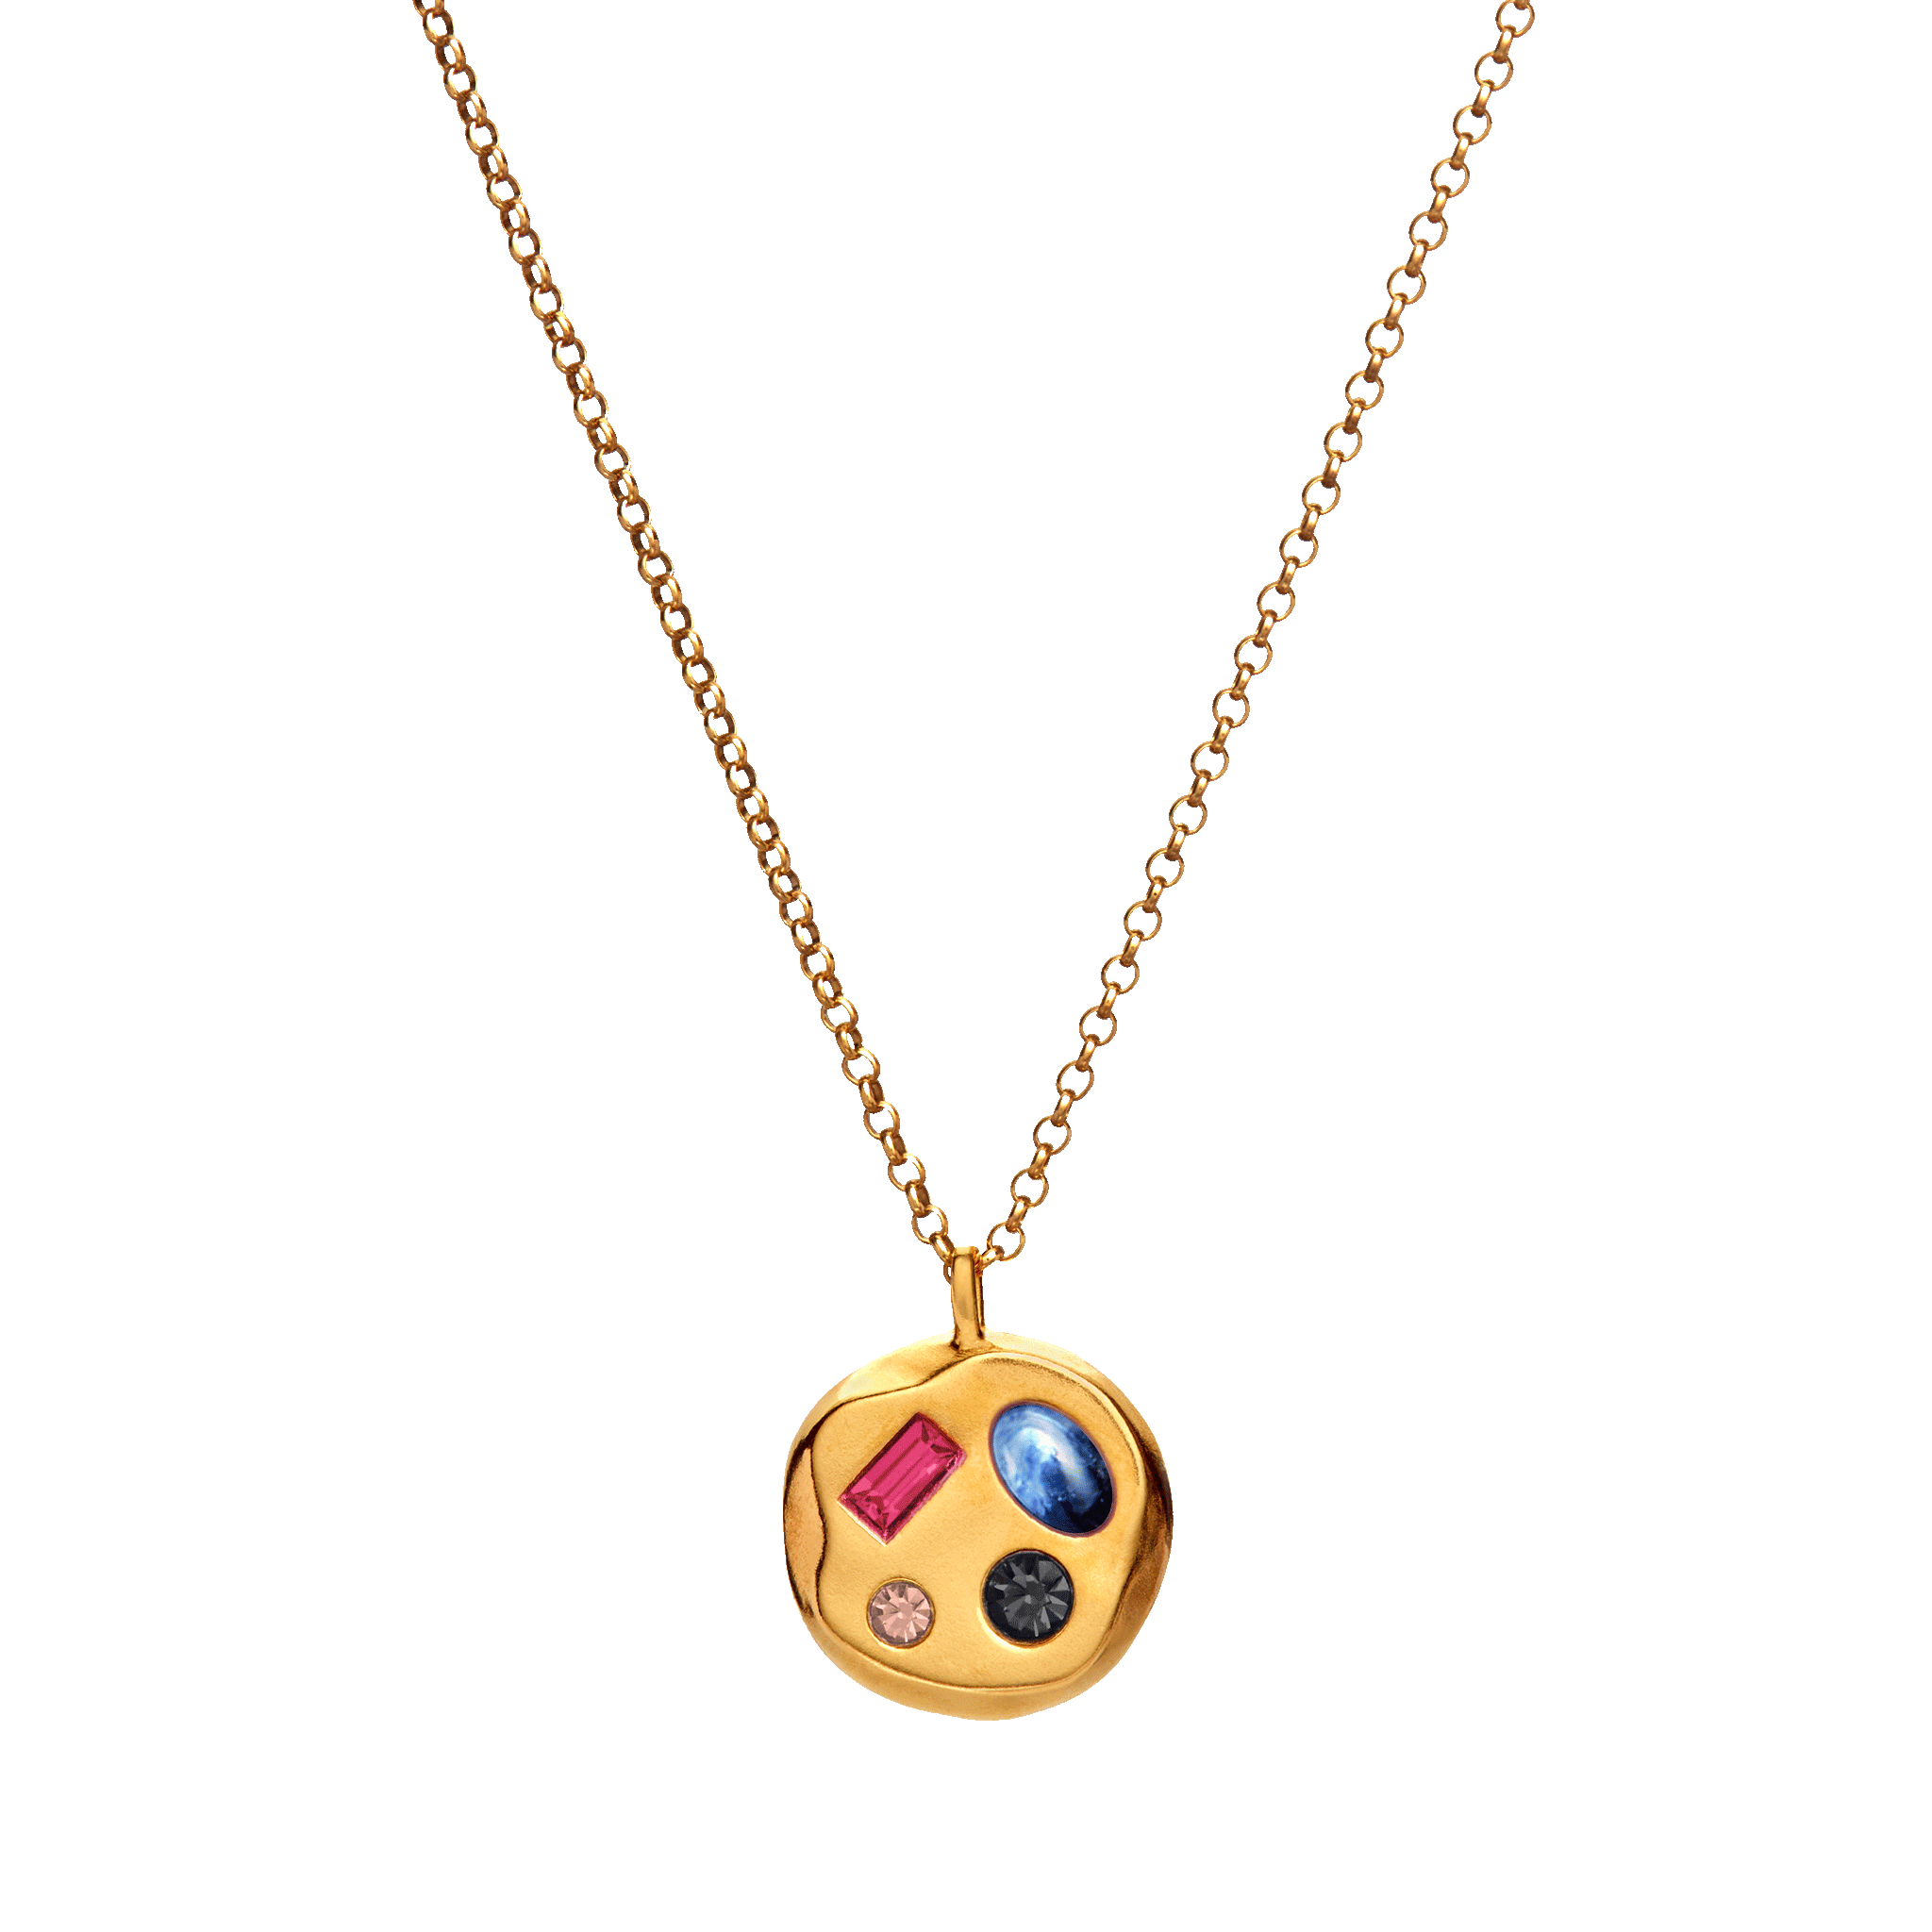 The July First Pendant